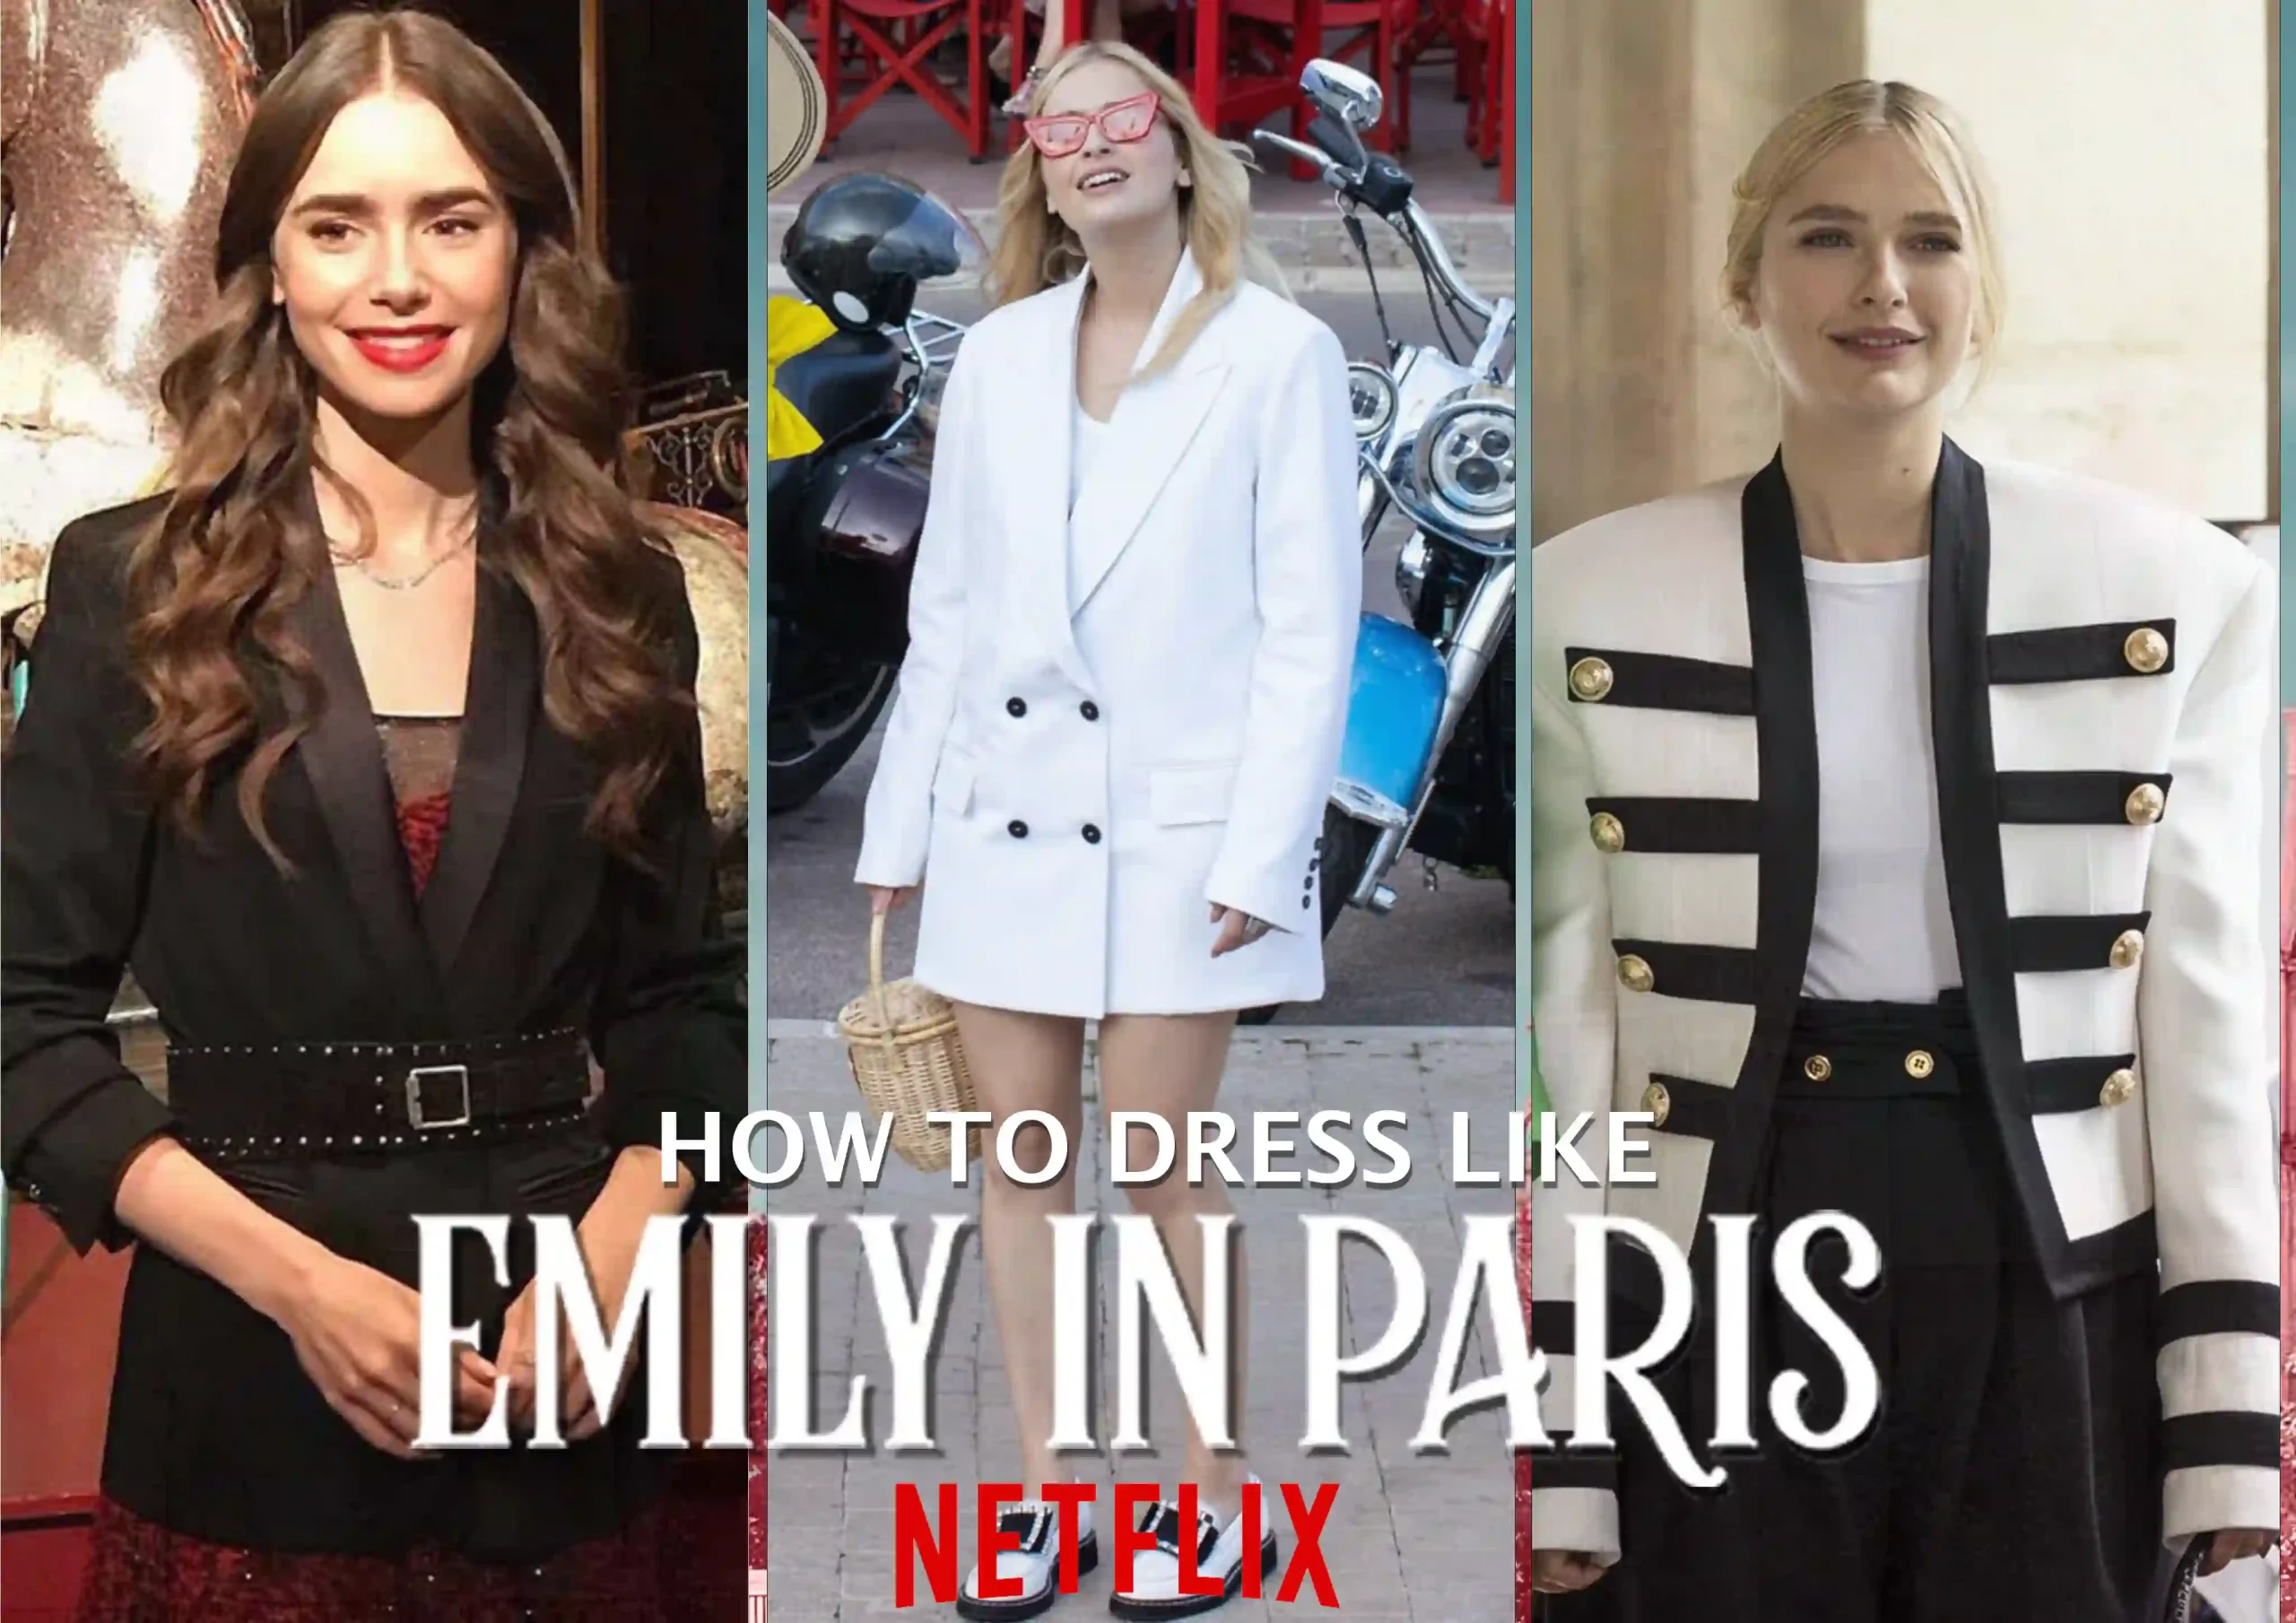 How to Dress Like Emily in Paris (Outfit Guide) - College Fashion